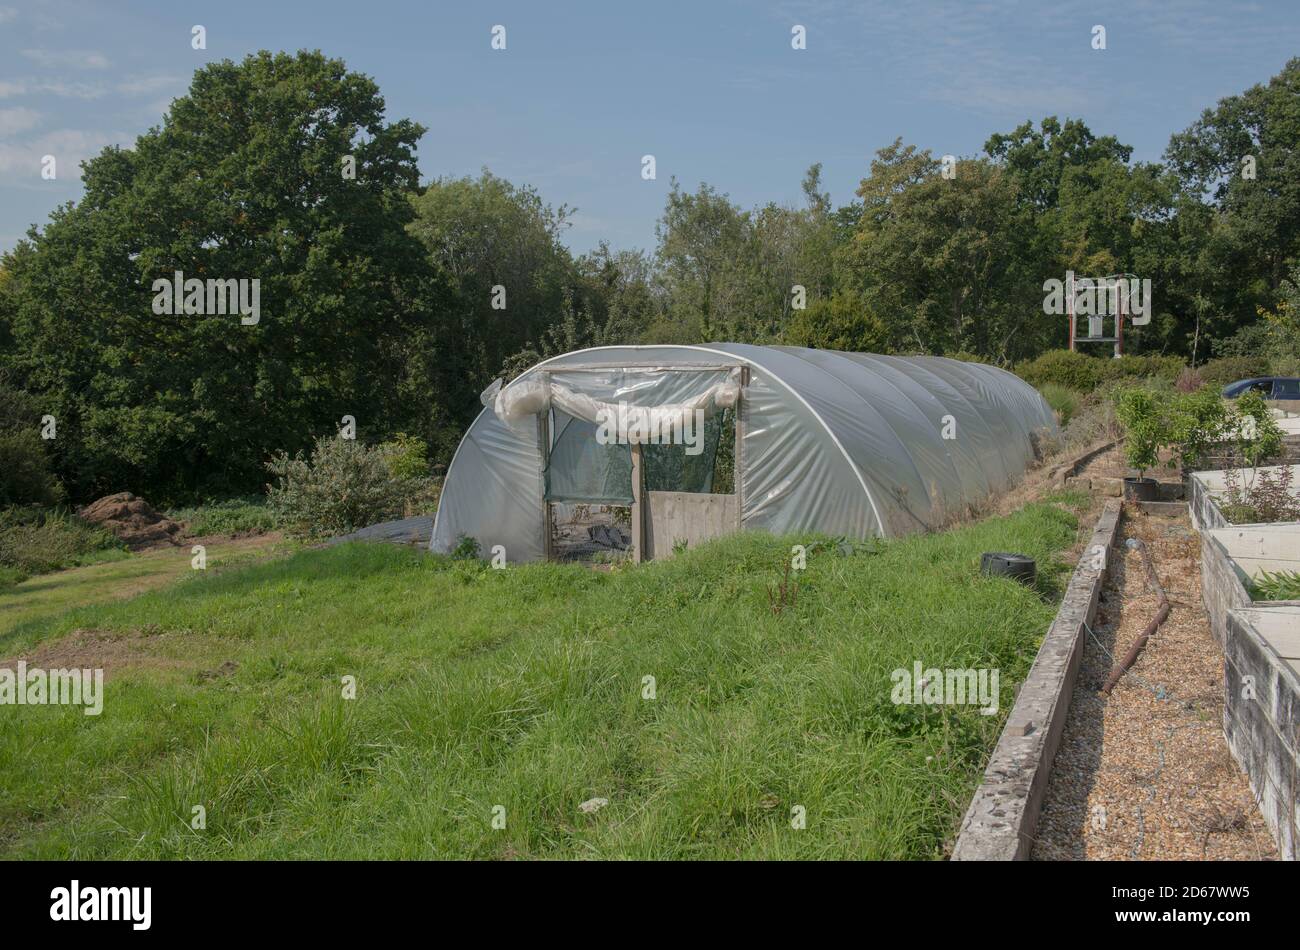 Polytunnel for Propagating Plants and Vegetables on an Allotment in a Vegetable Garden in Rural West Sussex, England, UK Stock Photo